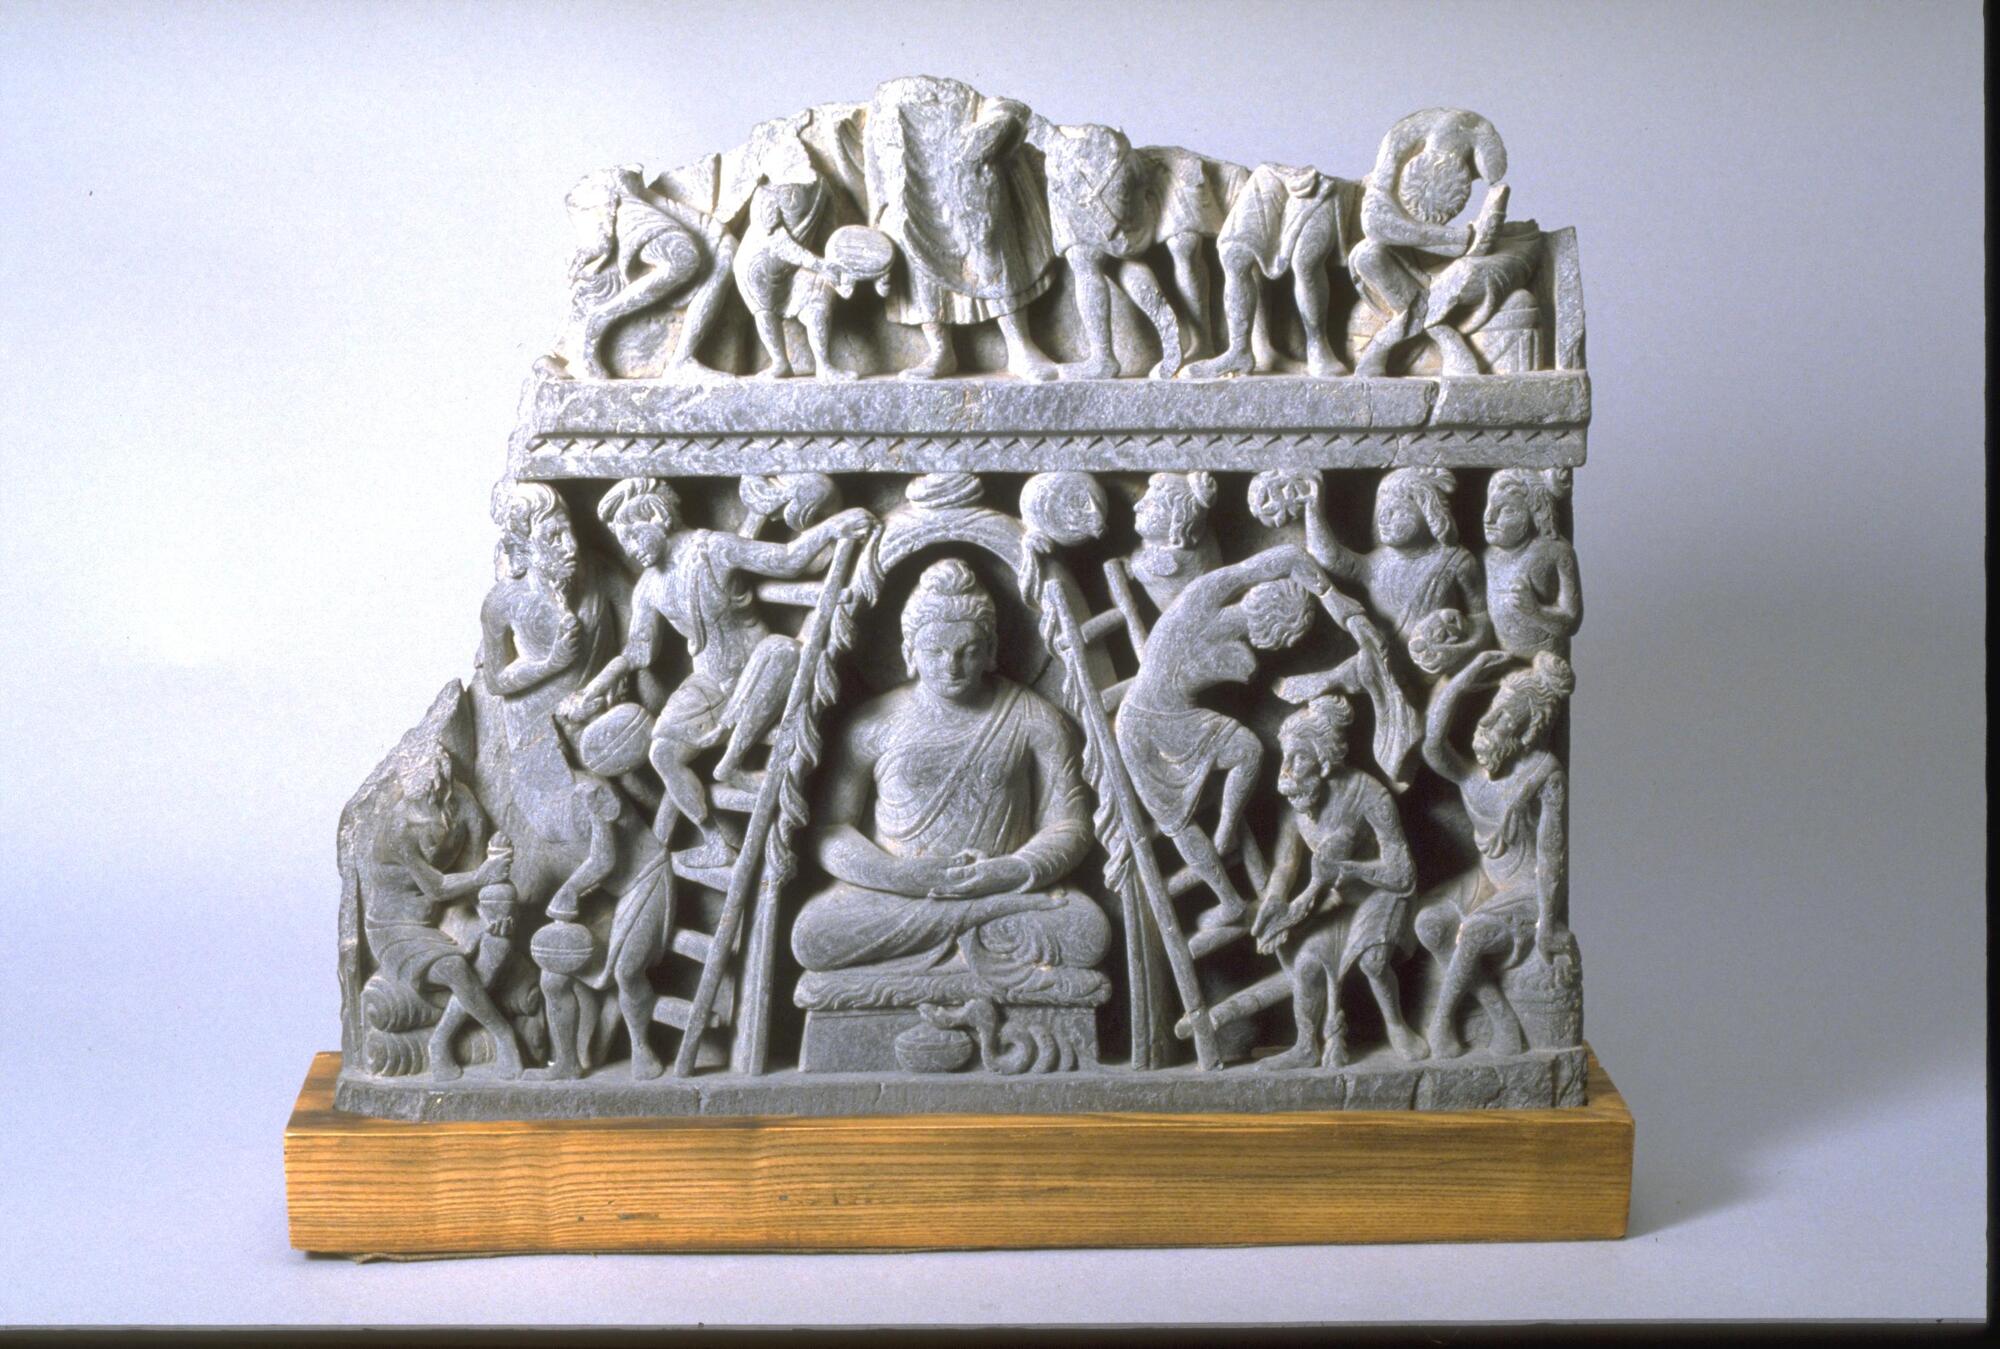 A fragment of a stone slab, originally a facing on the drum of a small stupa, carved with a narrative scene.  In this relief, he is converting devotees of the fire god Agni, the three ascetic Kasyapa brothers and their disciples. In this narrative, the Buddha asked to spend the night in the fire temple of Uruvilva Kasyapa. The temple’s fire god worshipers thought the fearsome fire serpent that dwelled within the temple would vanquish the Buddha.  Instead, the fiery radiance of the meditating Buddha overwhelmed the serpent, who crawled into the Buddha’s alms bowl; the defeated snake appears in this sculpture below the Buddha. Meanwhile, the dazzling radiance the Buddha emits has been mistaken for flames and a fire brigade using ladders and pots of water has been formed to put out the fire, as can be seen here. Seated in the posture and gesture of meditation, the Buddha’s calm presence is in contrast to the action unfolding around him. The three Kasyapa brothers, with their beards and matted hair, are at the bo